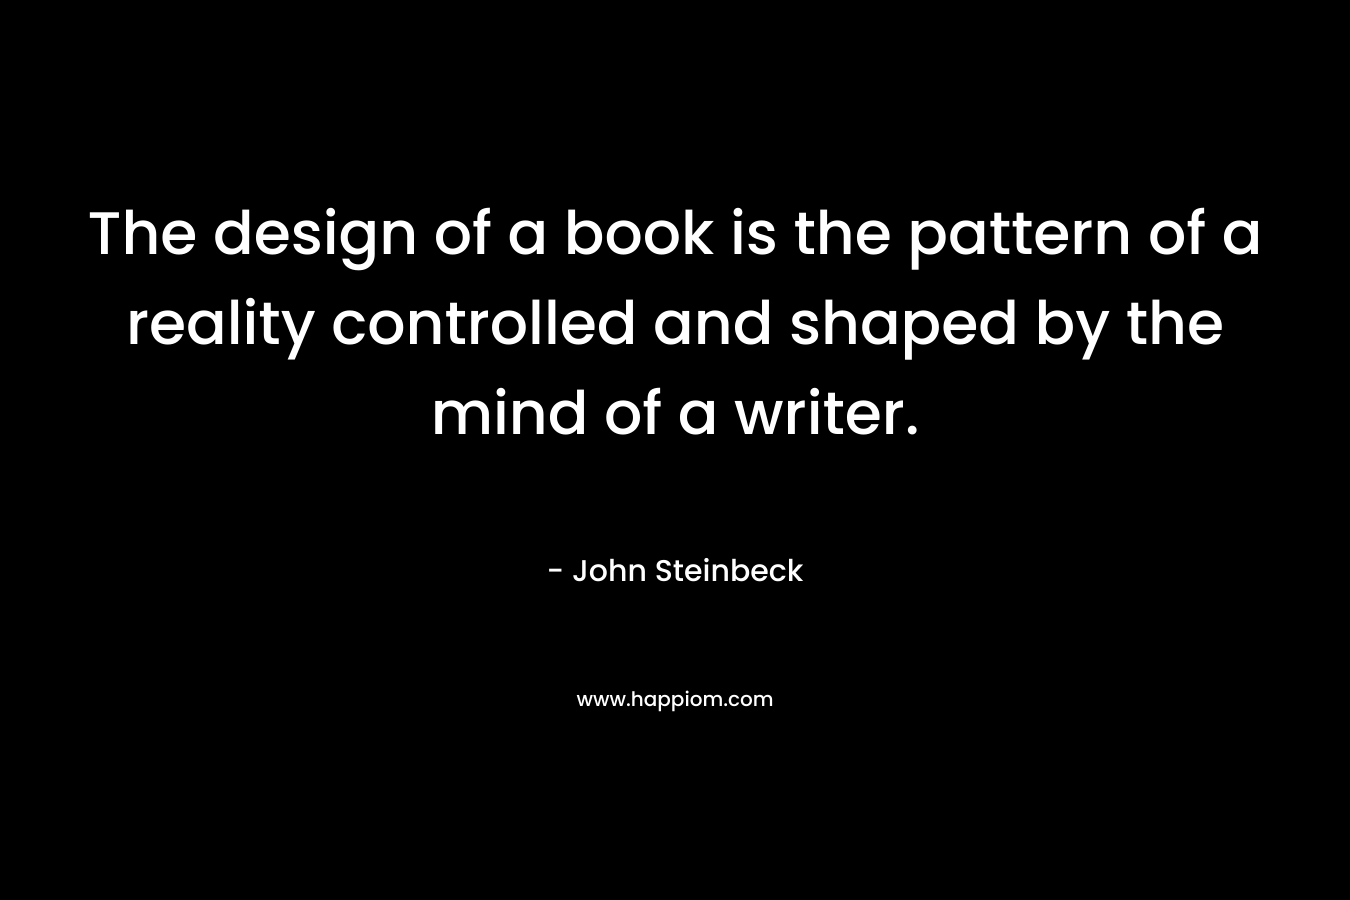 The design of a book is the pattern of a reality controlled and shaped by the mind of a writer. – John Steinbeck